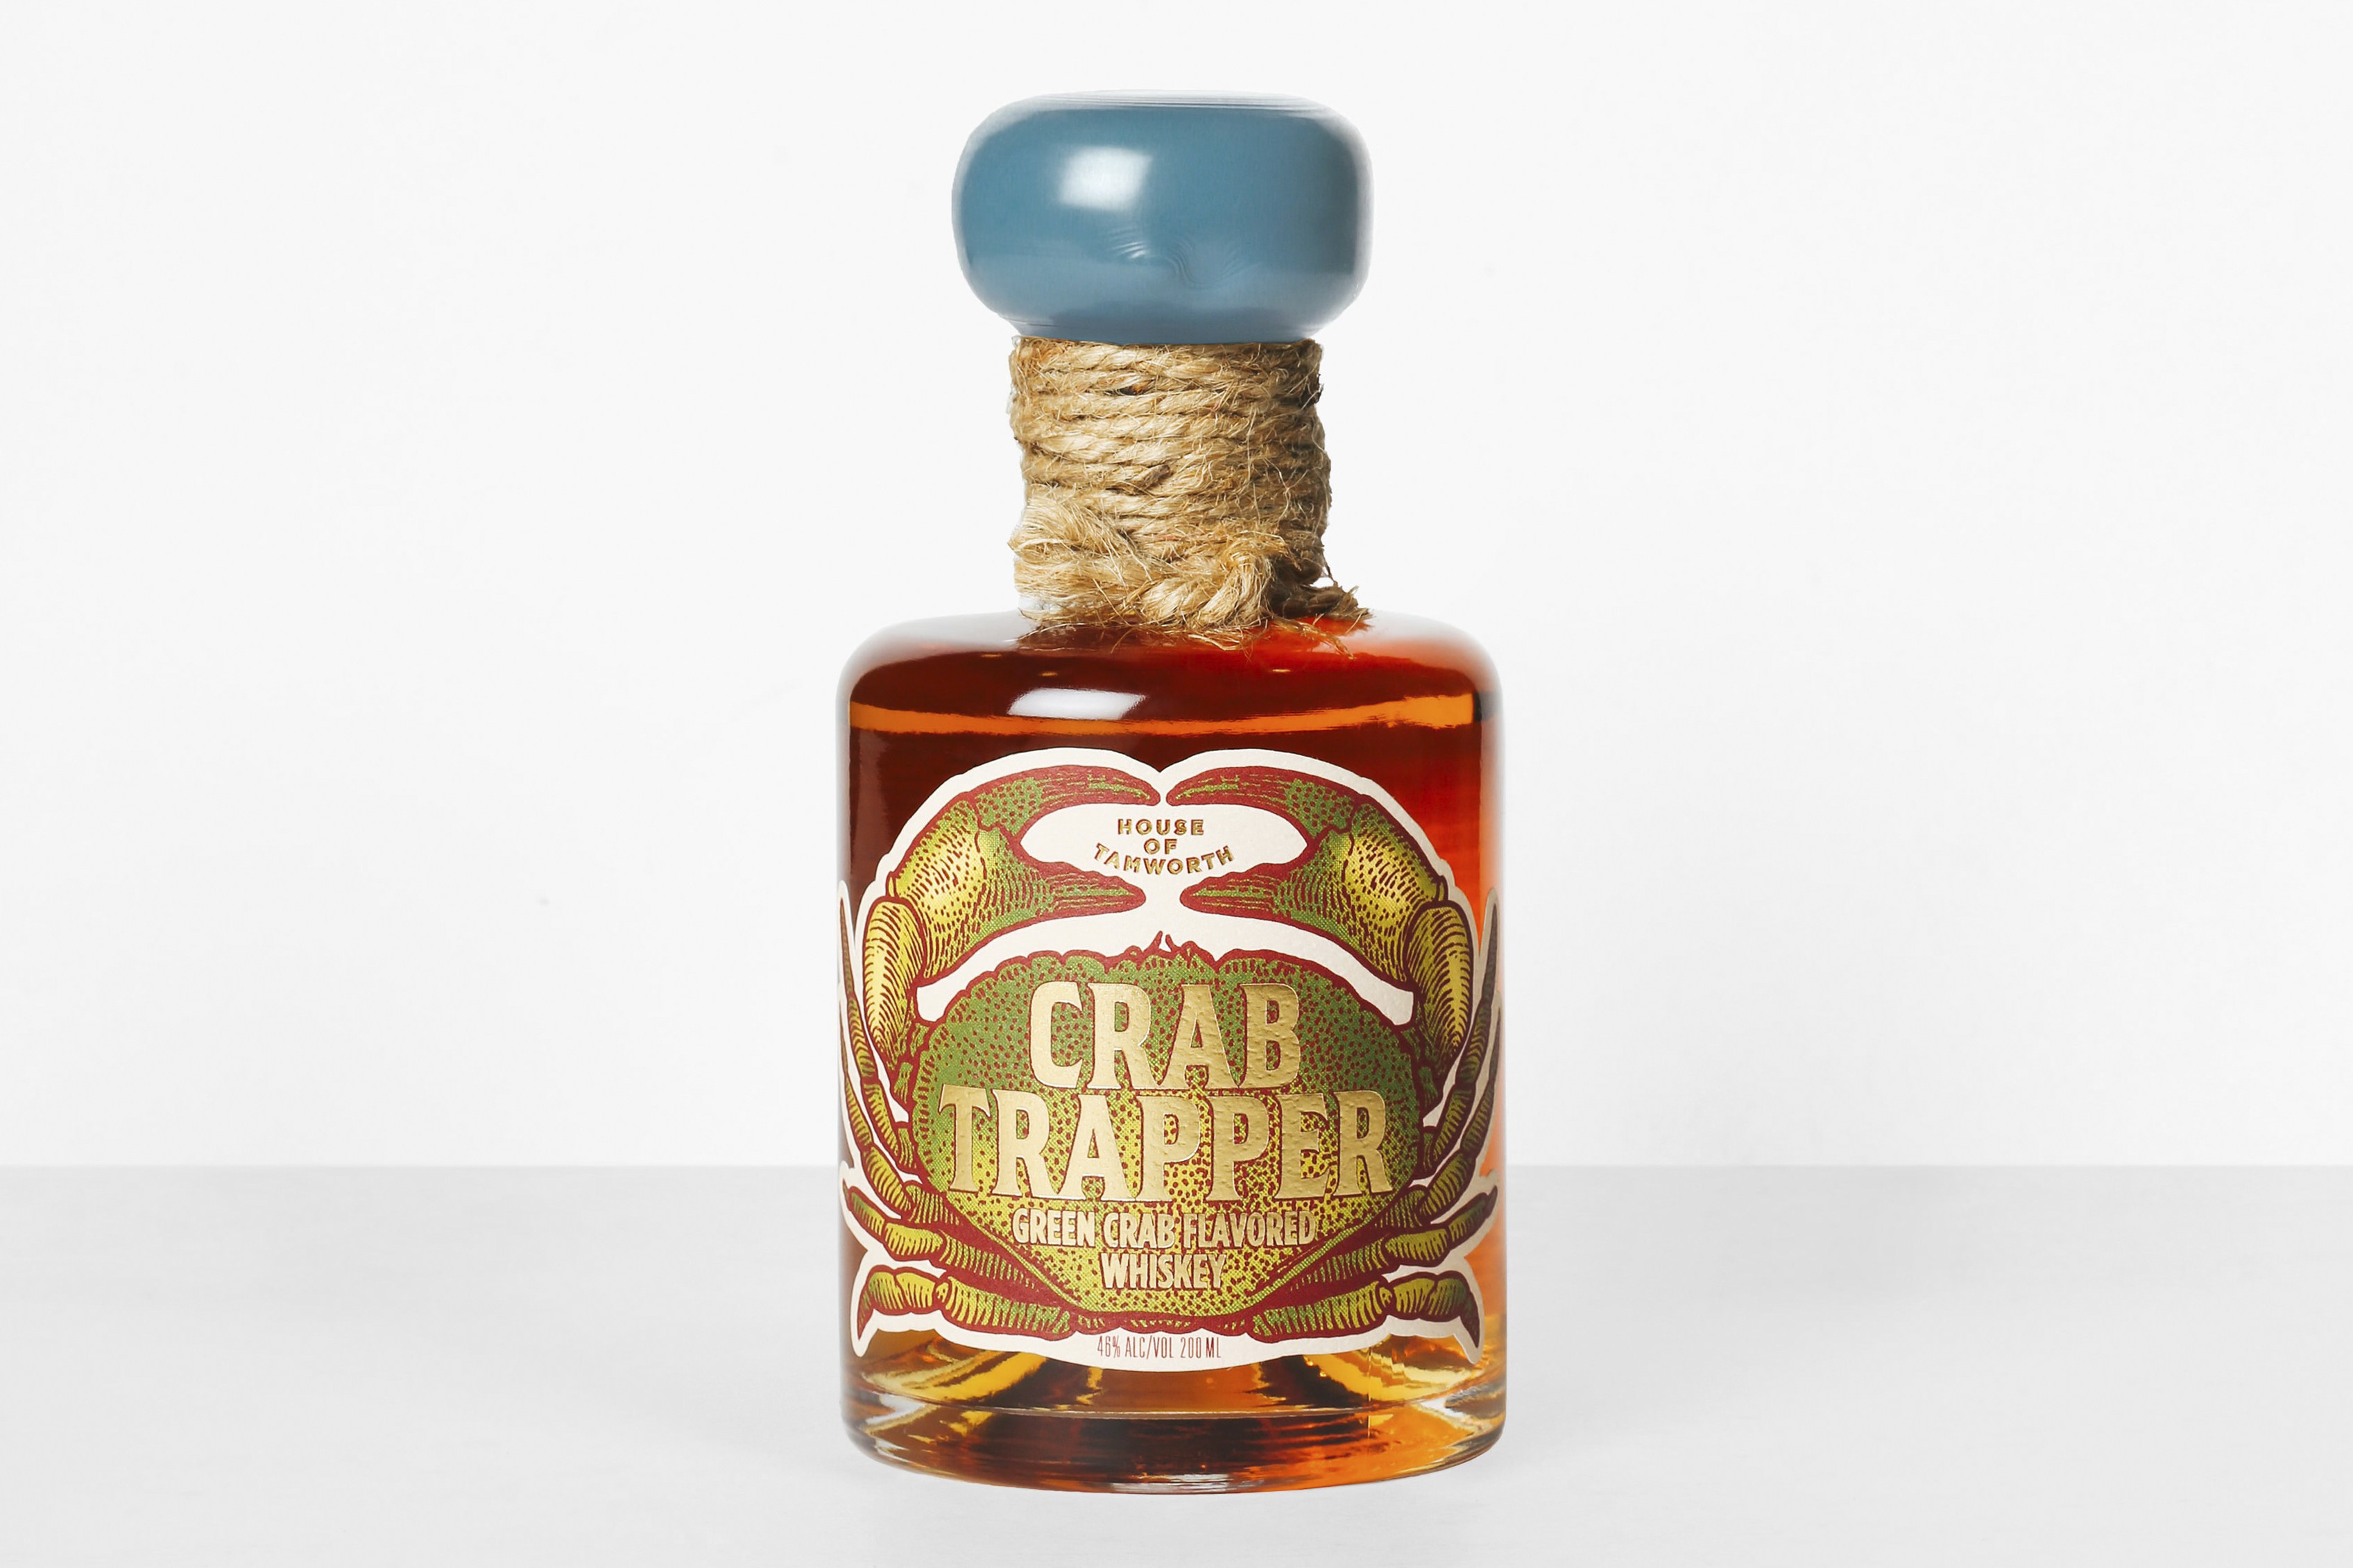 A bottle of Crab Trapper, a whiskey made with green crabs by House of Tamworth distillers. Photo: Madeline Heenan/Quaker City Mercantile photo via AP